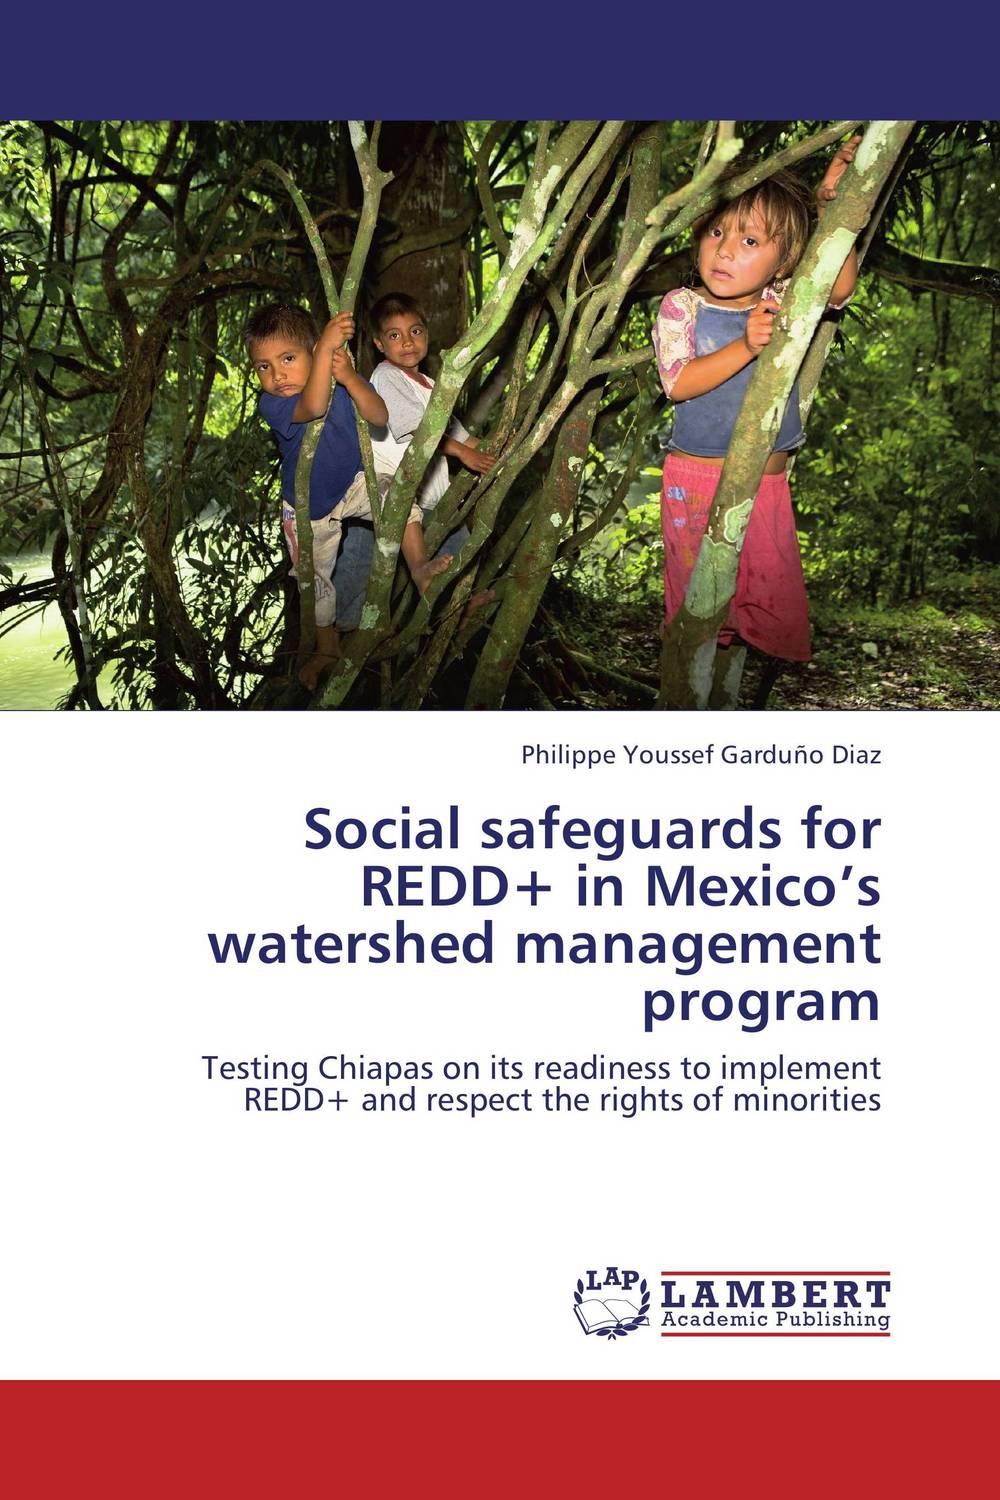 Social safeguards for REDD+ in Mexico’s watershed management program